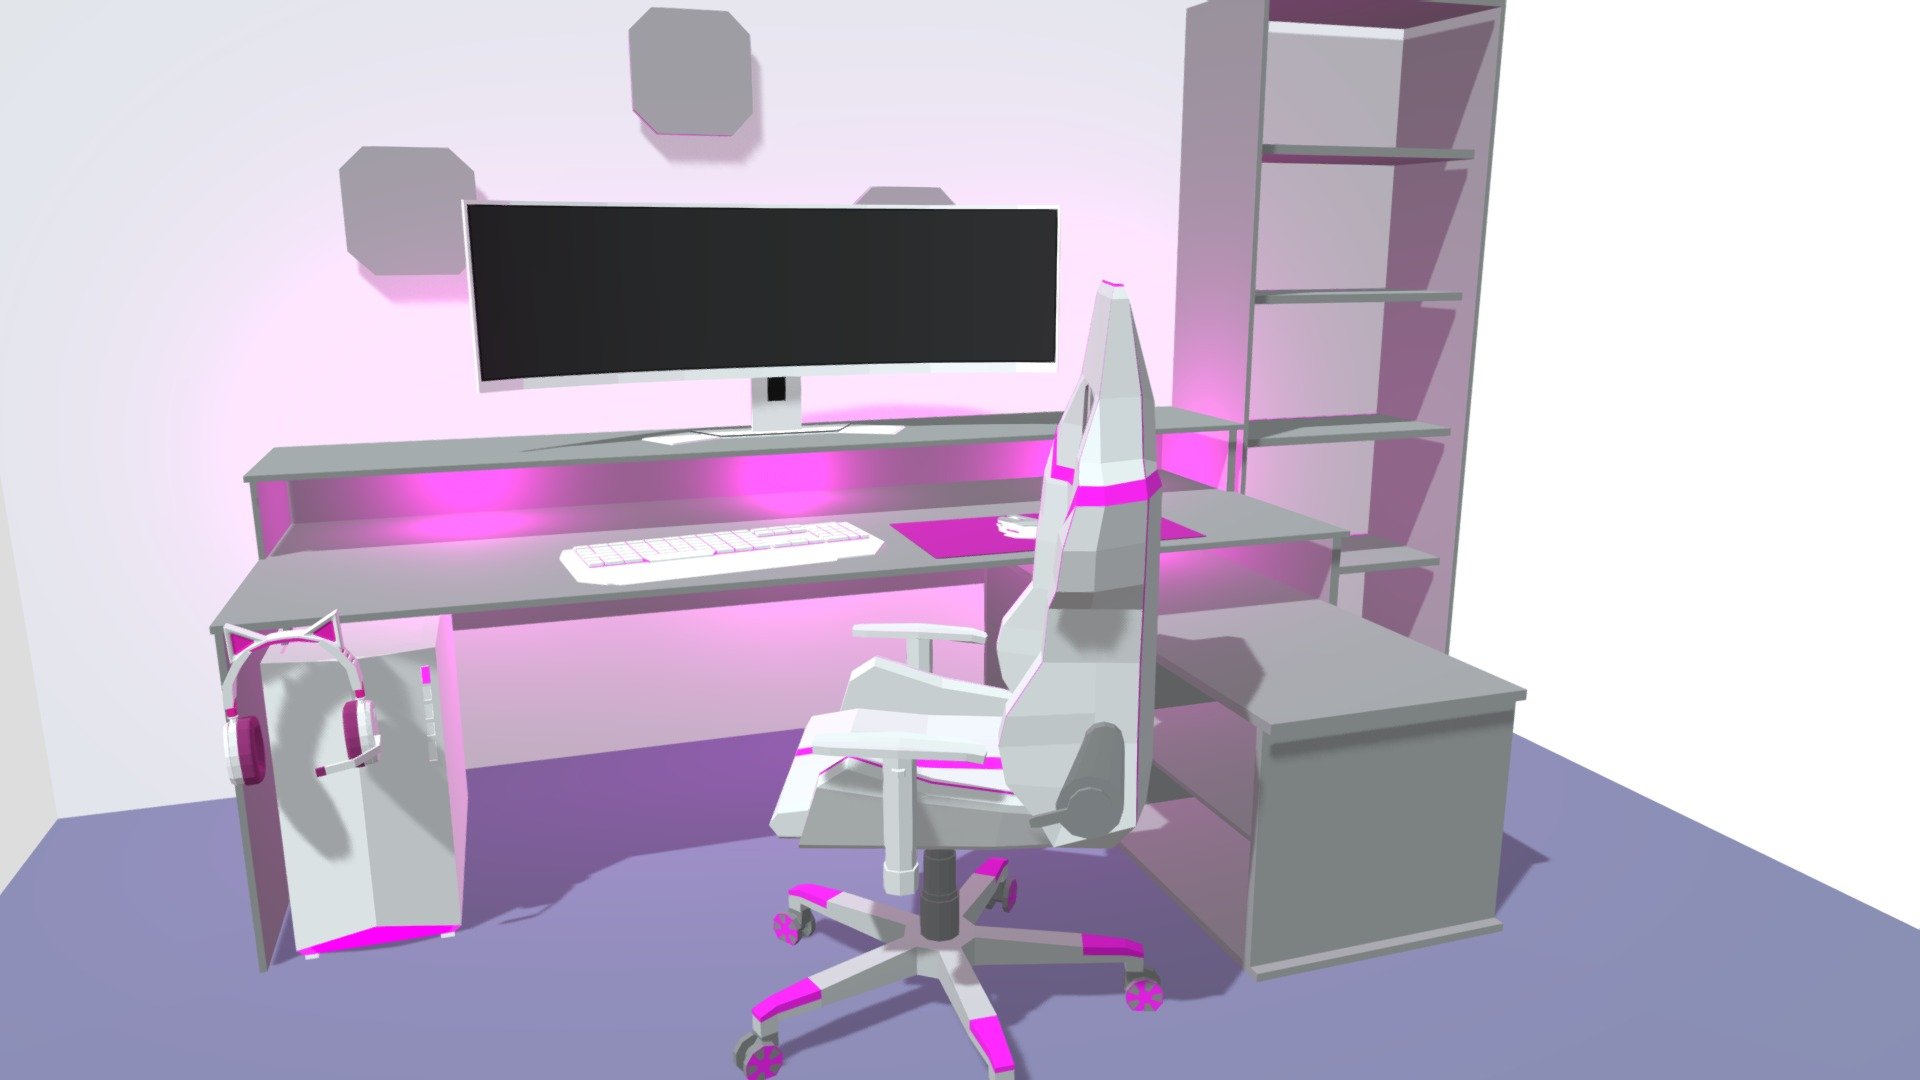 A simple Gamingsetup in a cool Lowpoly Style. You could use it for your next game or a littel Video. The lowpoly comic like style is timeless and cool you should try to create a video game with this kind of graphic style 3d model